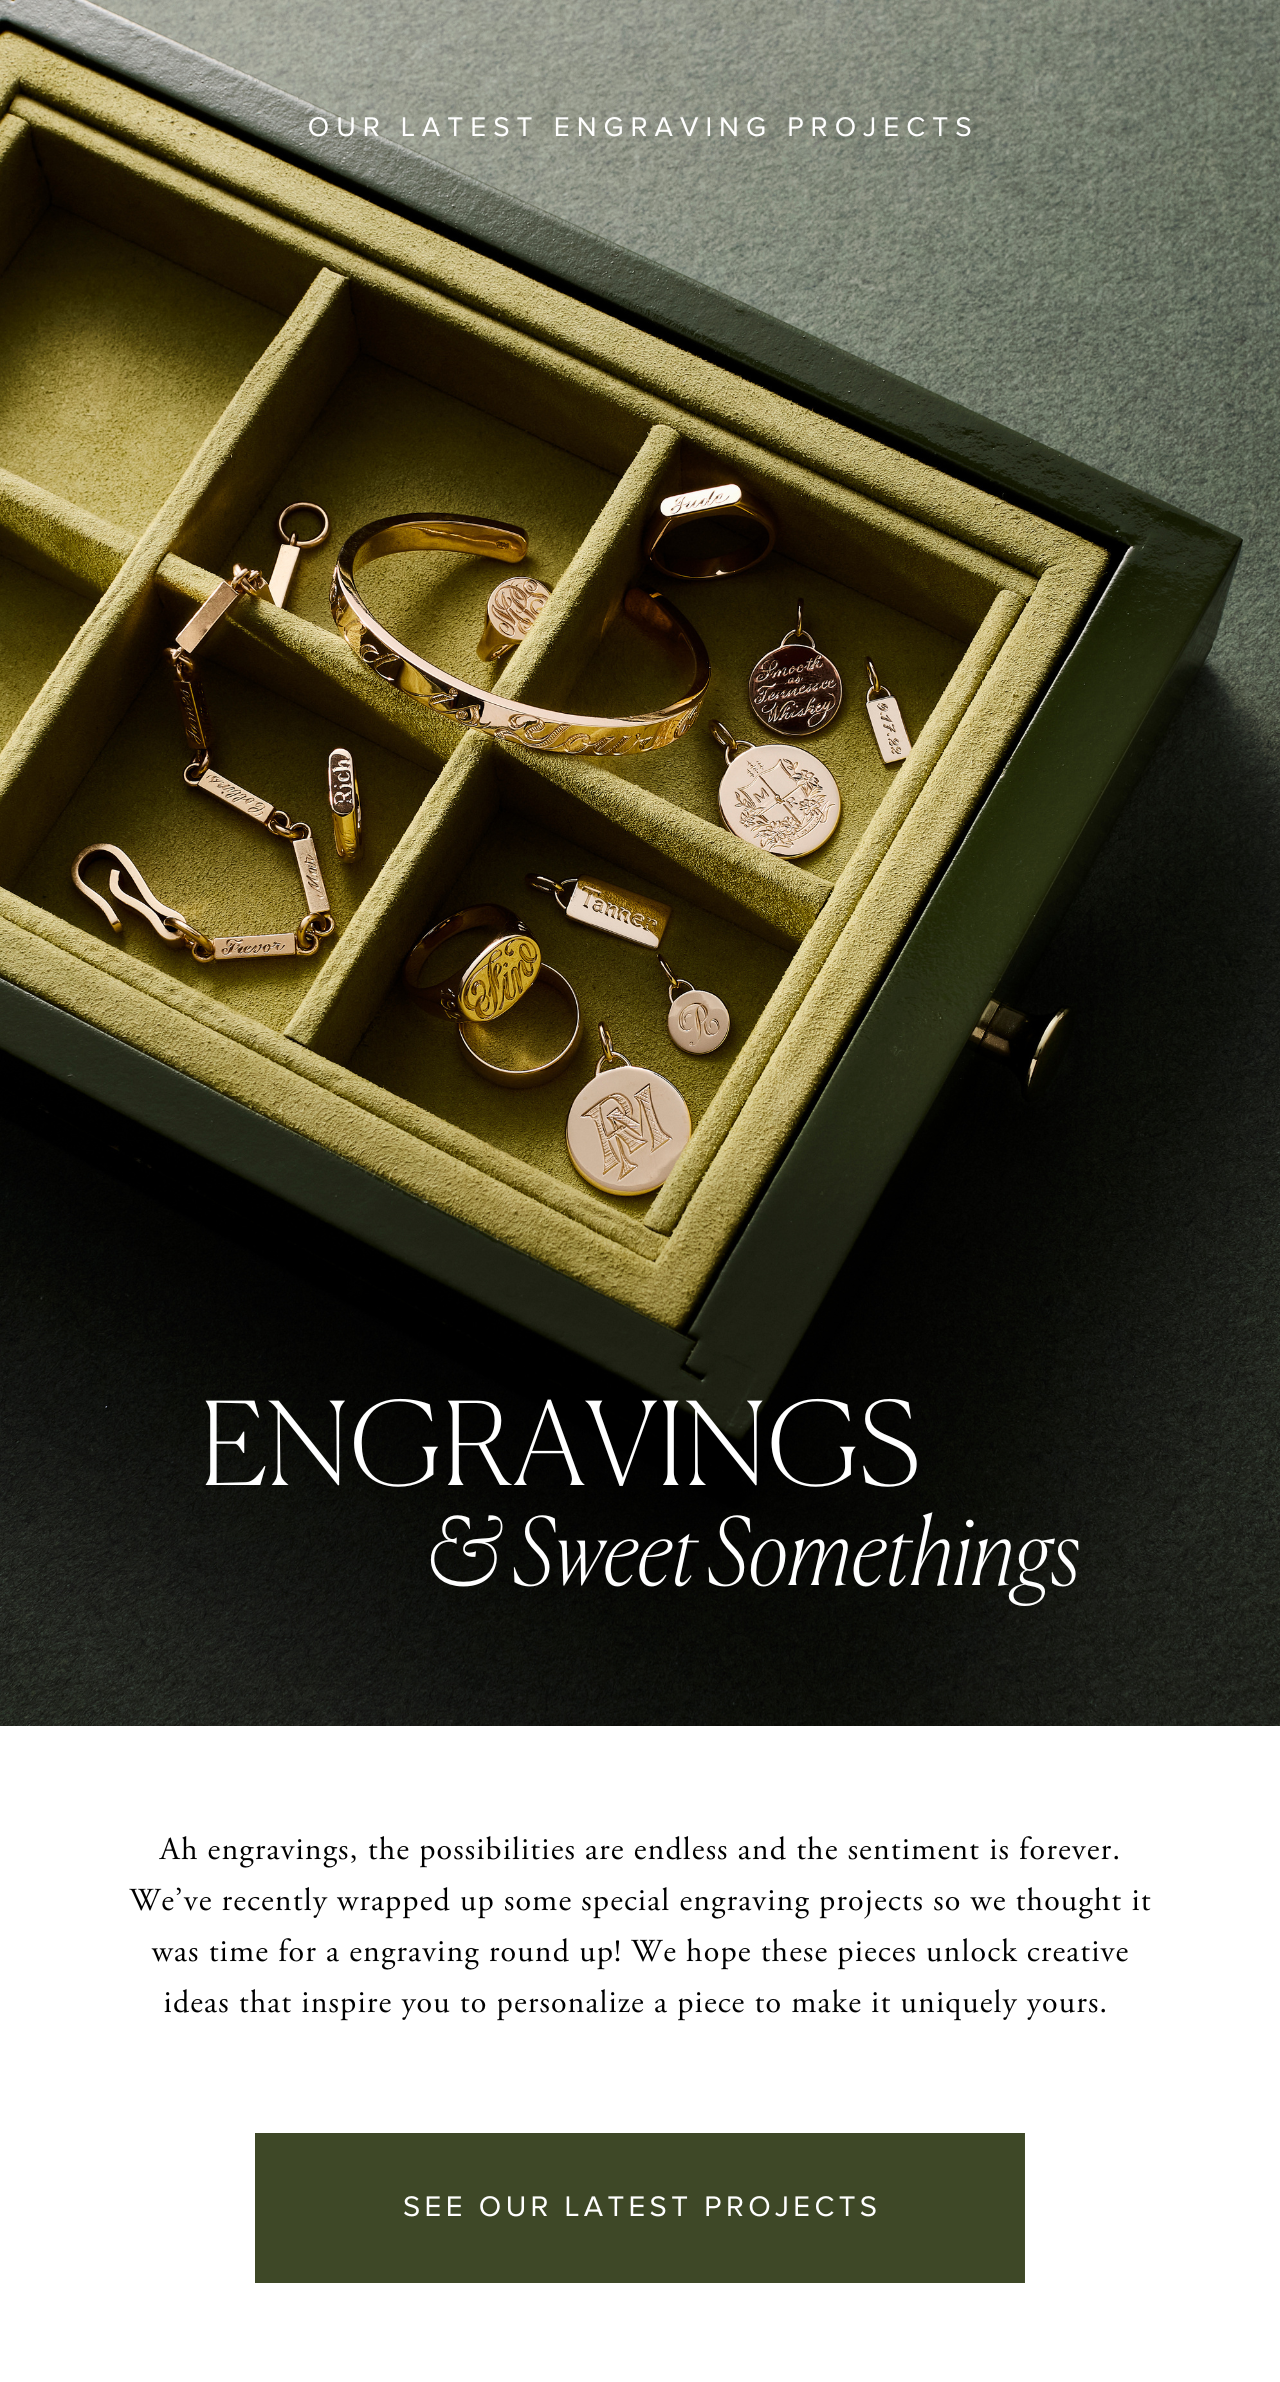 Our Latest Engraving Projects: Engravings & Sweet Somethings